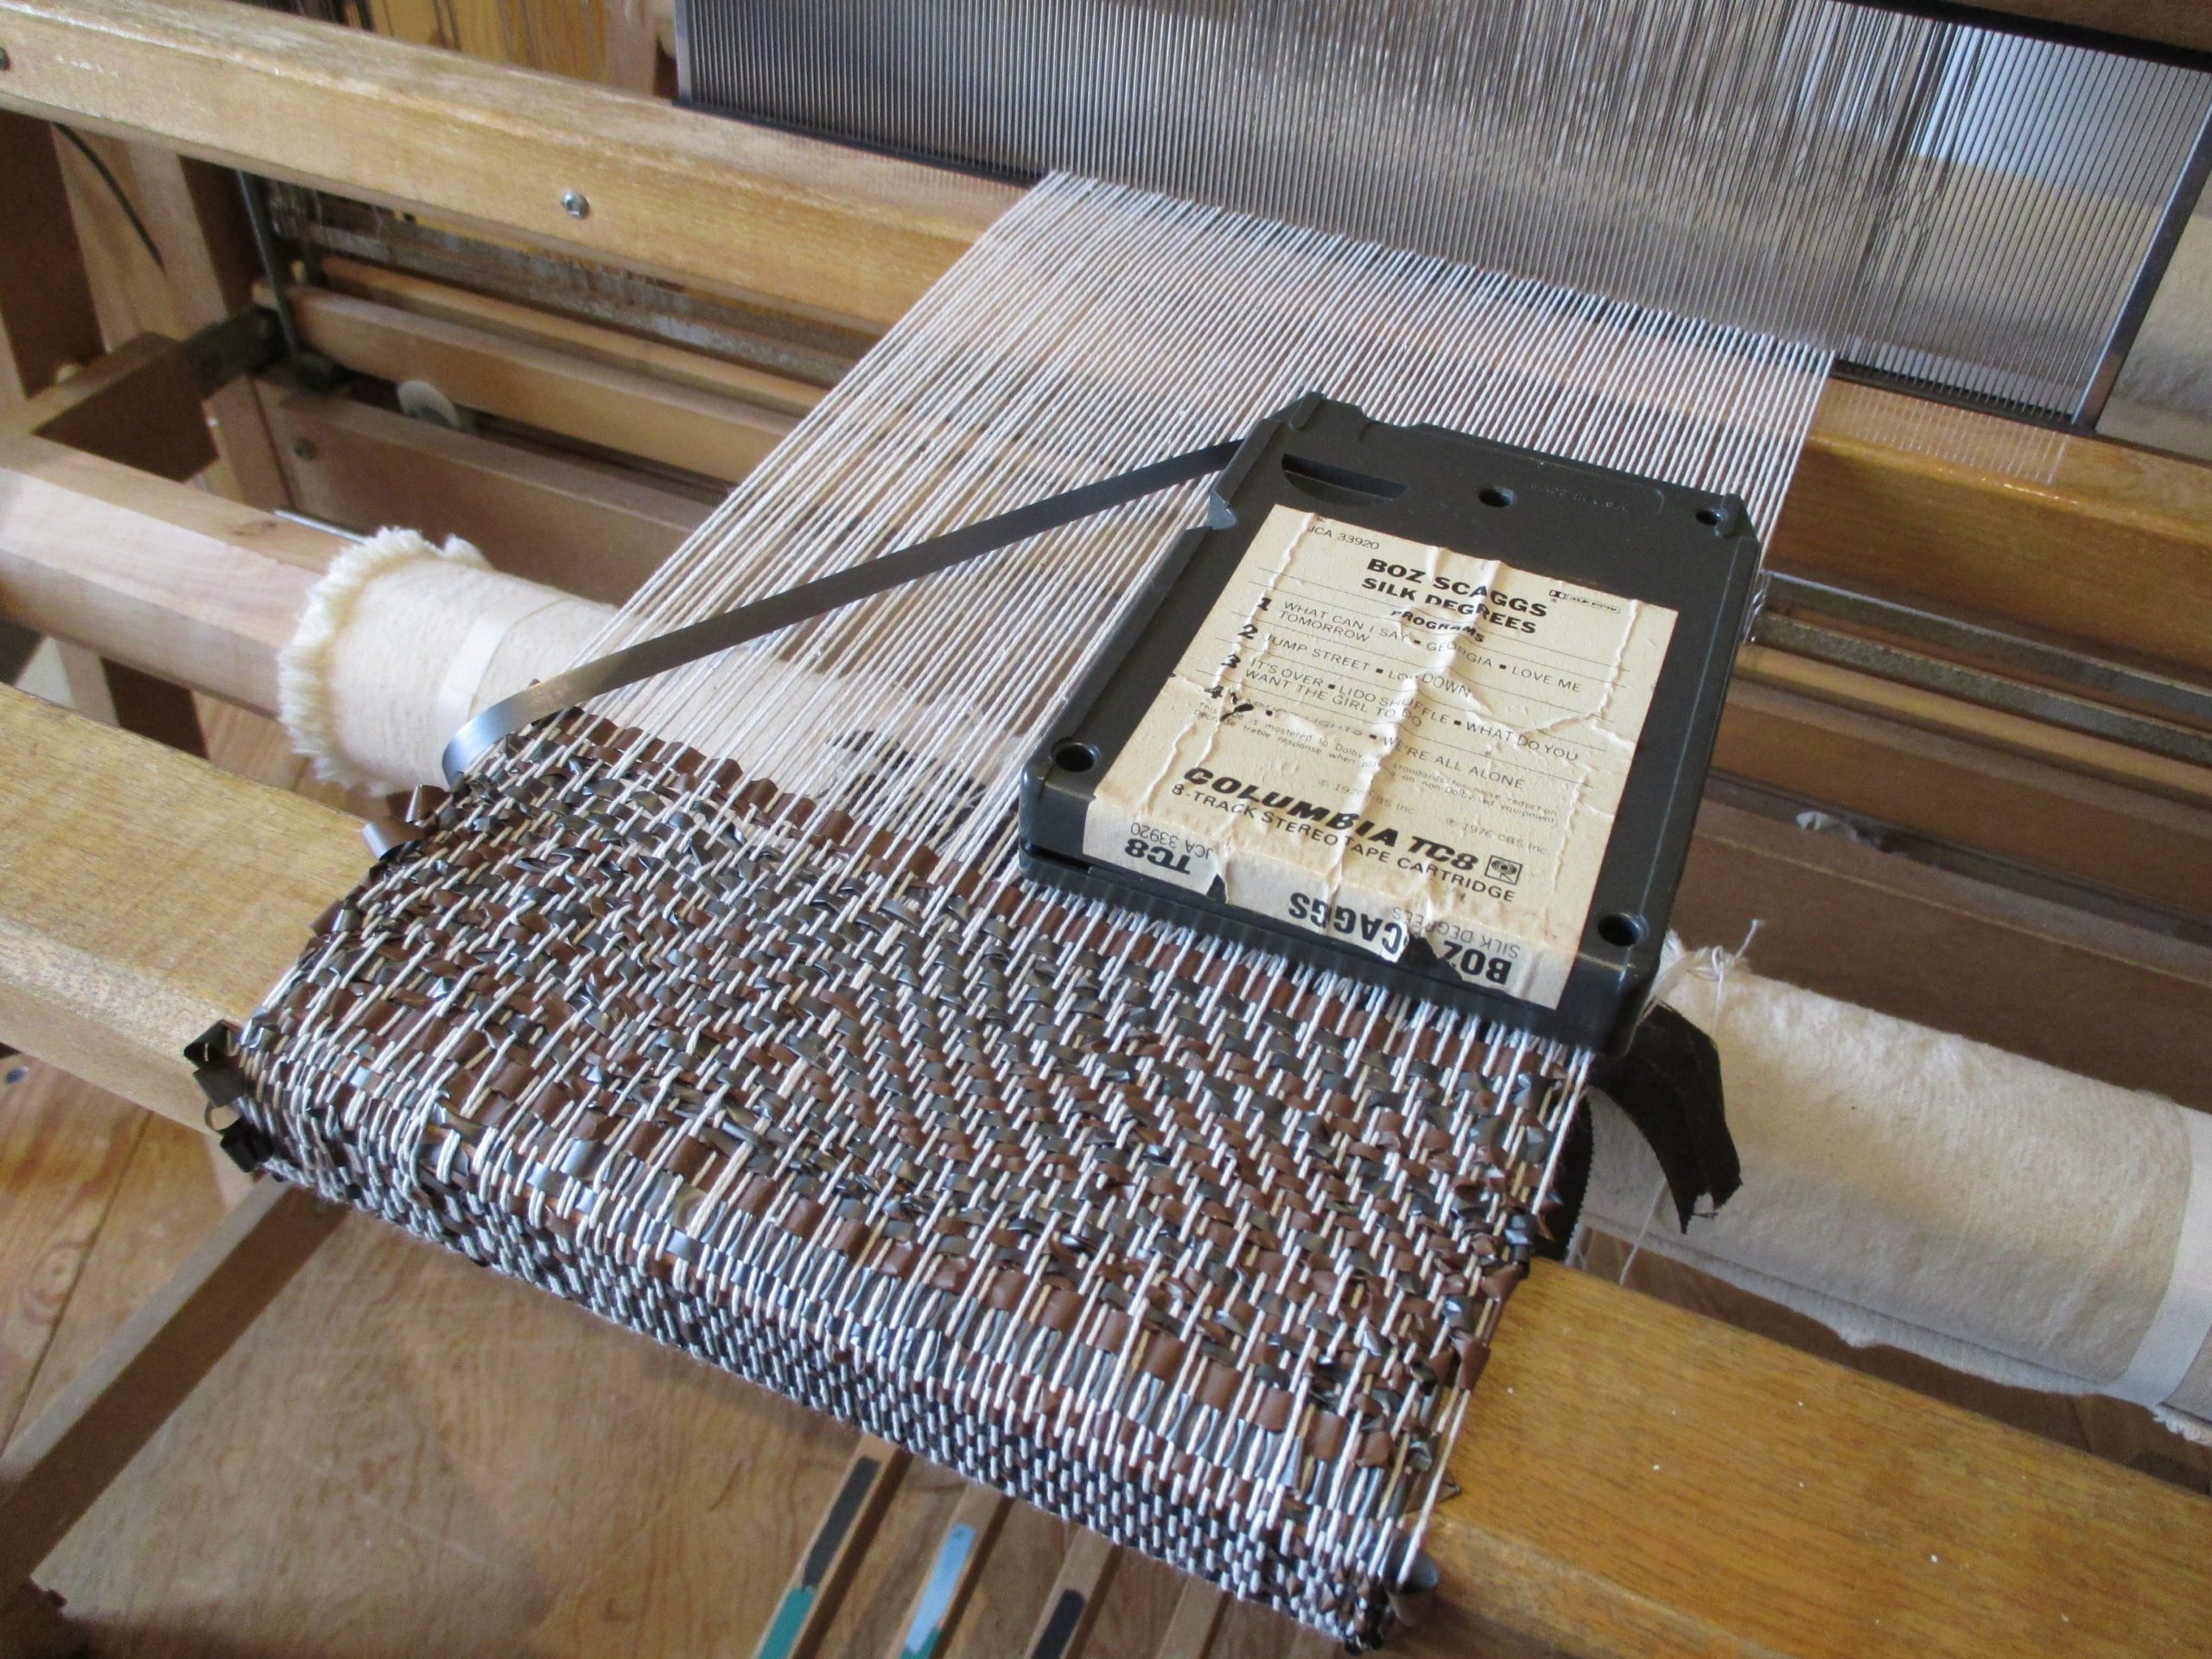 A close up image of a floor loom with white string as the warp and 8-track tape as the weft. An 8-track tape sits on top of the woven fabric.